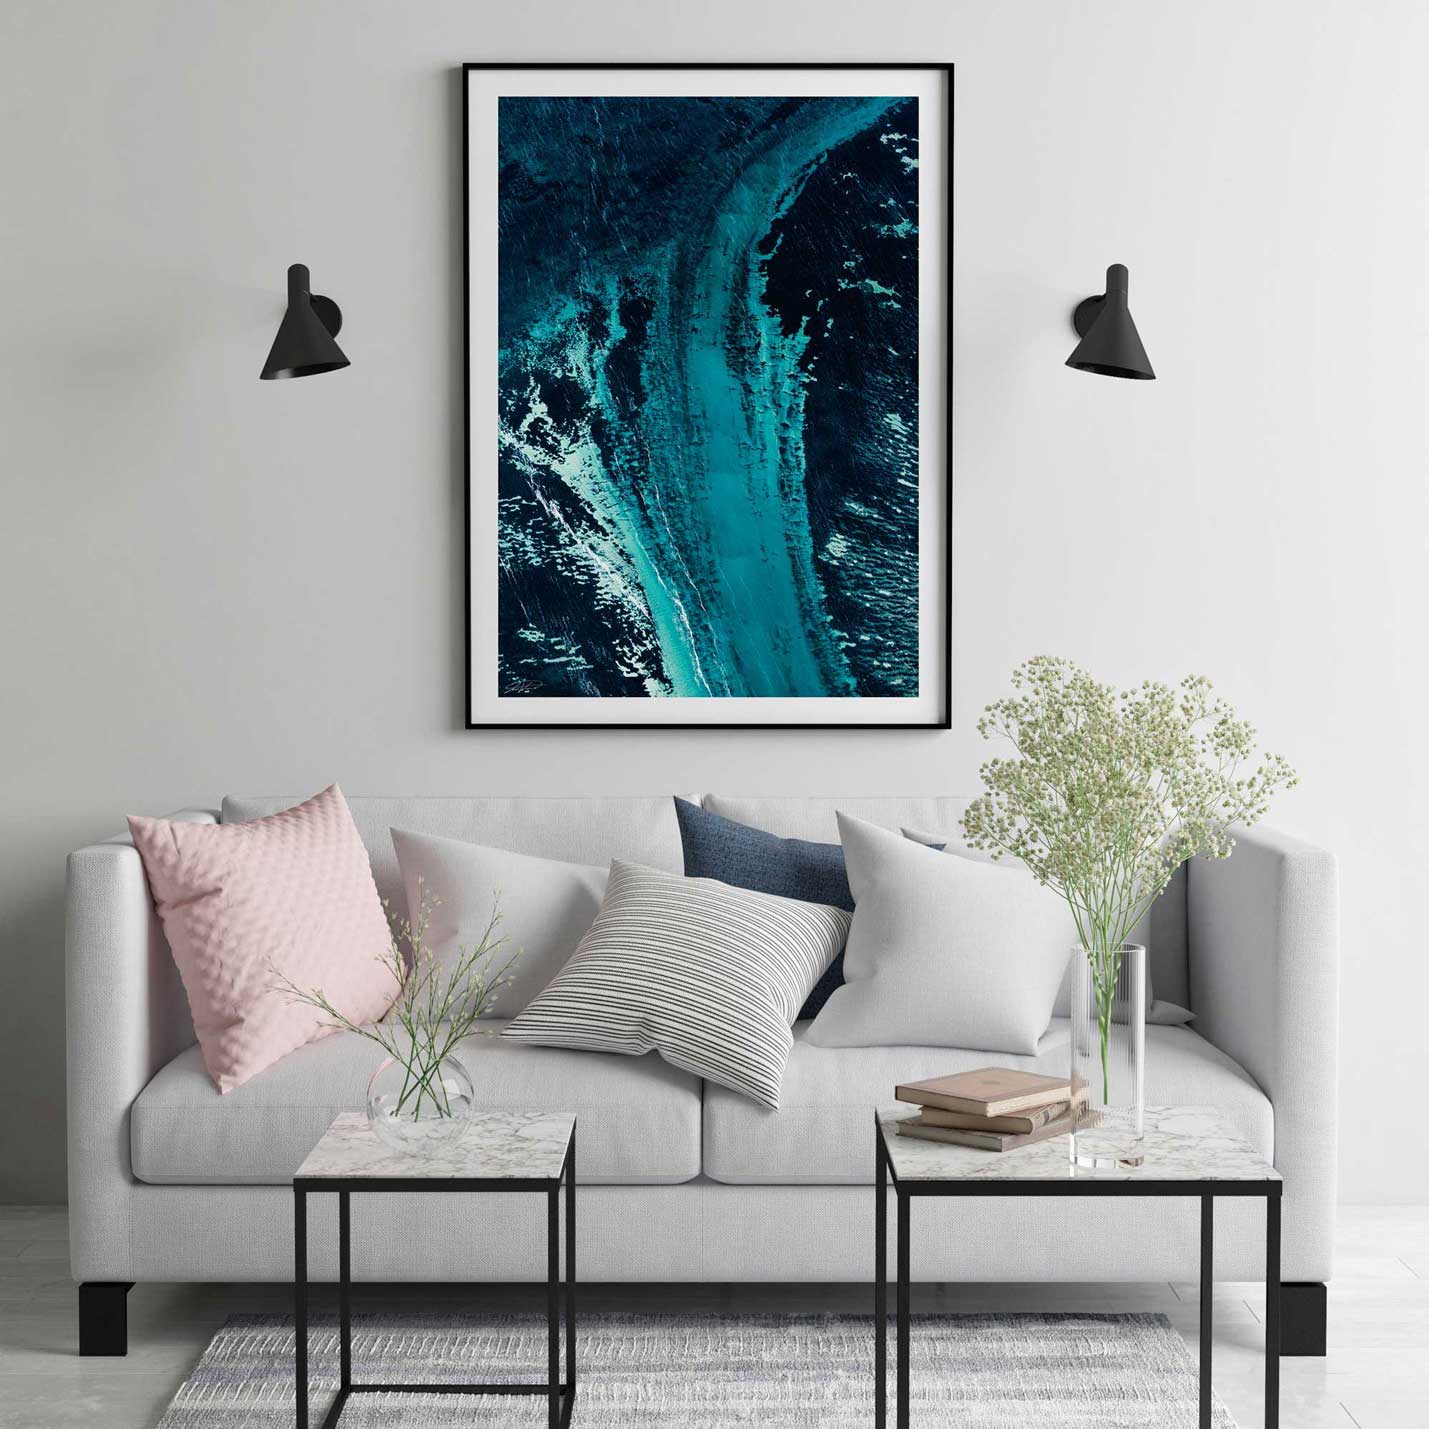 Abstract textured wall art with blue and green textured beach ocean images